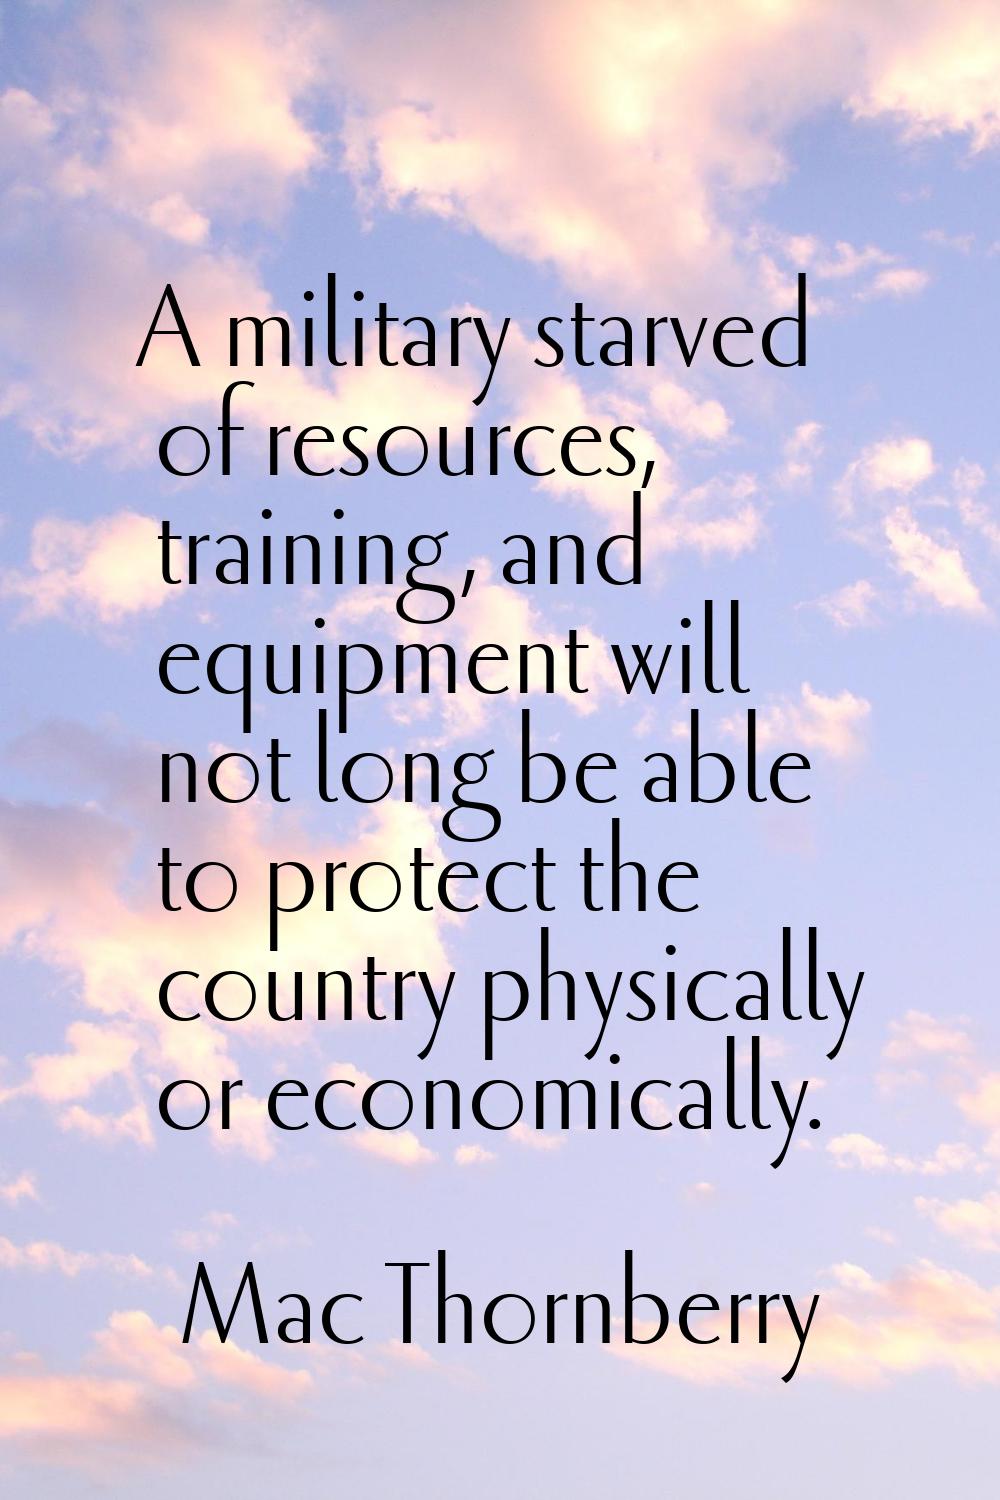 A military starved of resources, training, and equipment will not long be able to protect the count